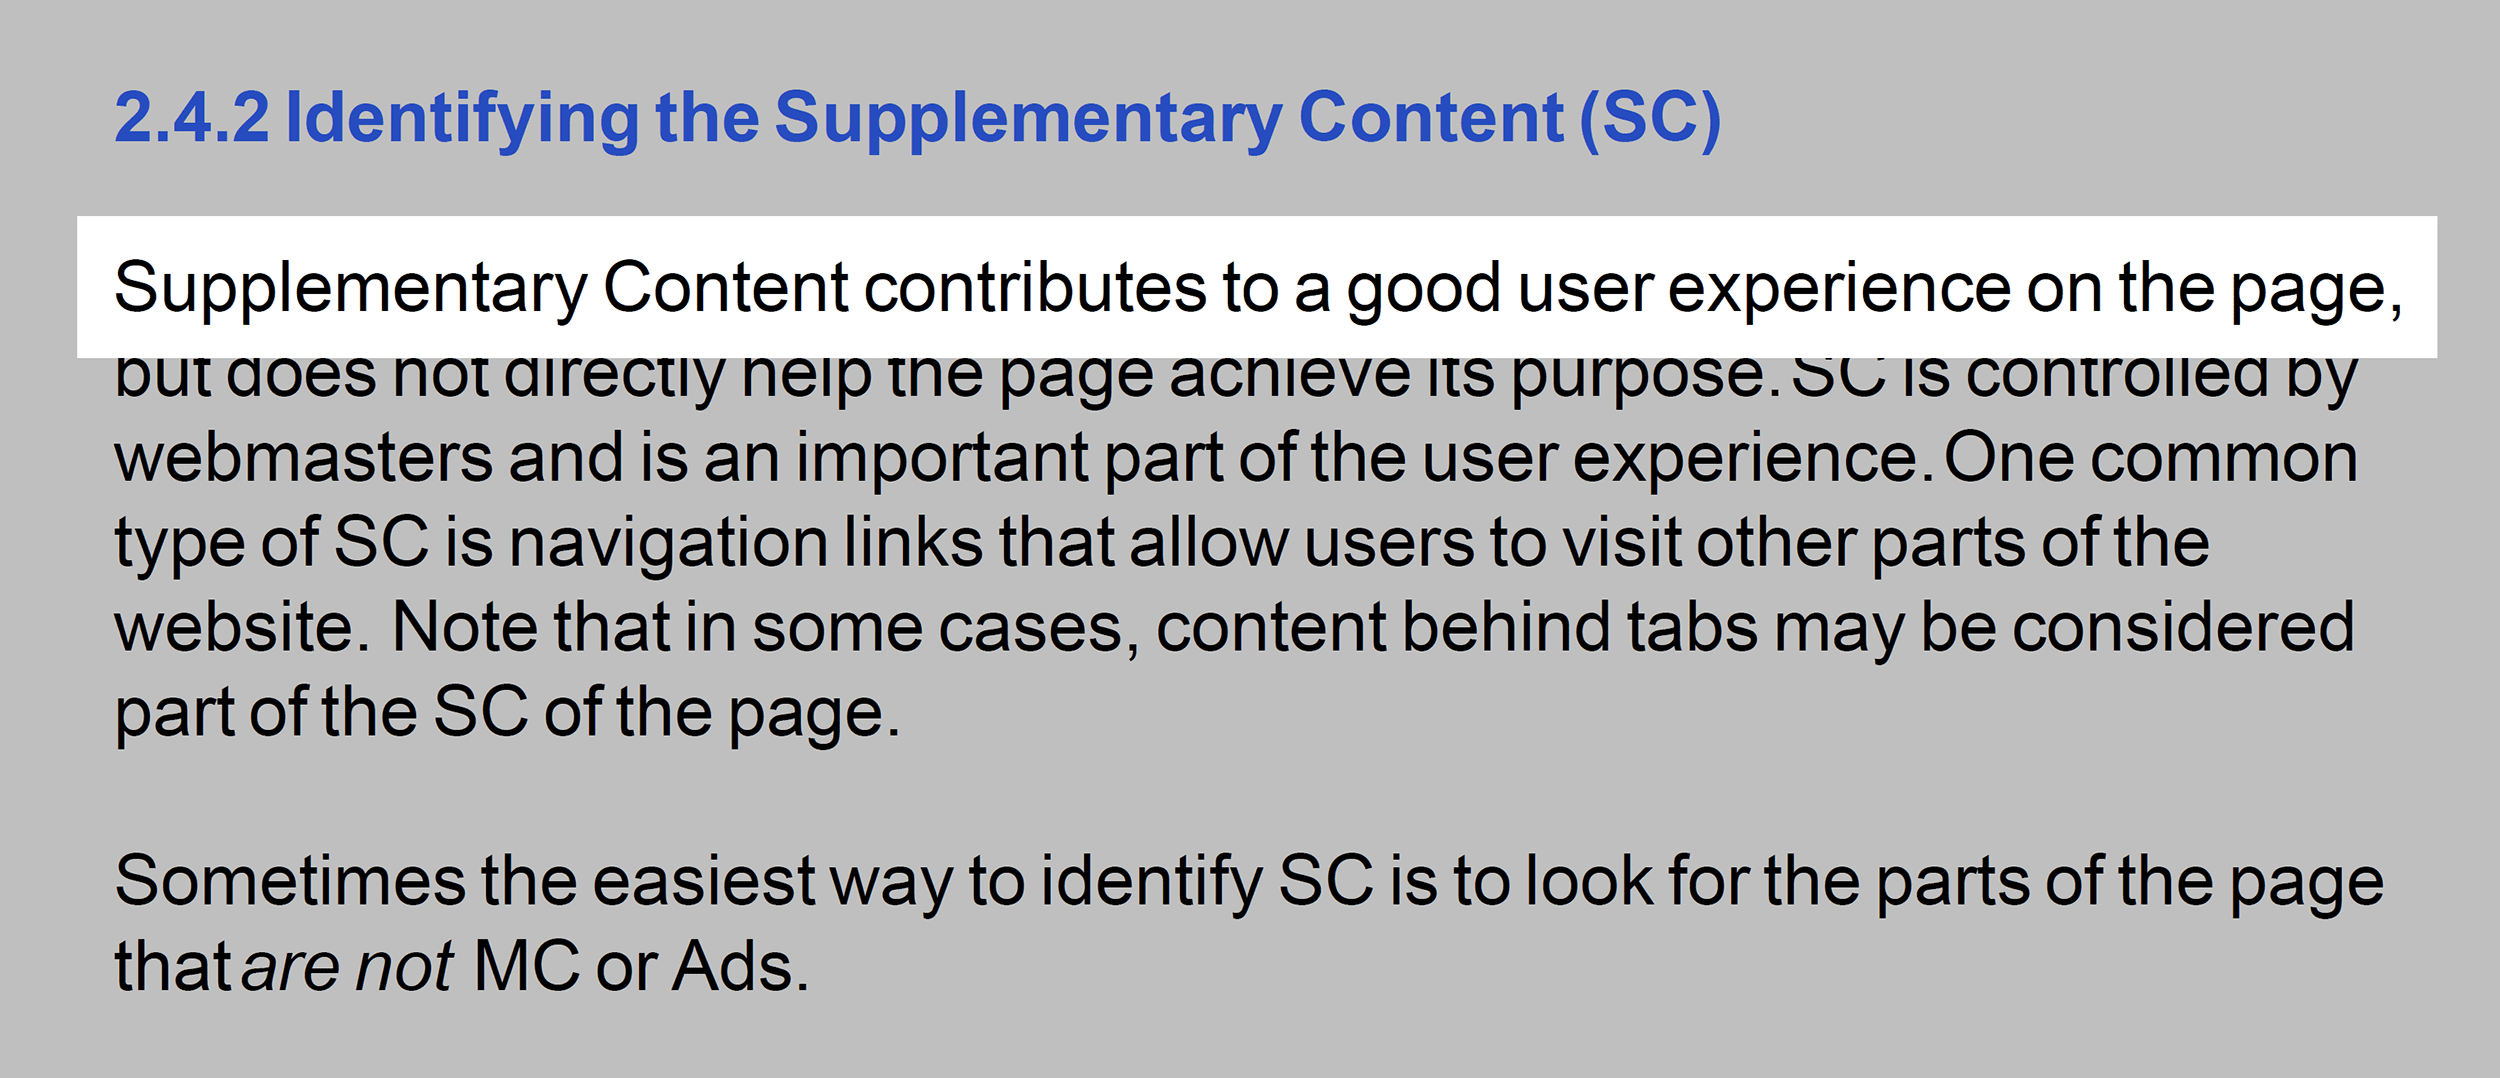 Google on supplementary content